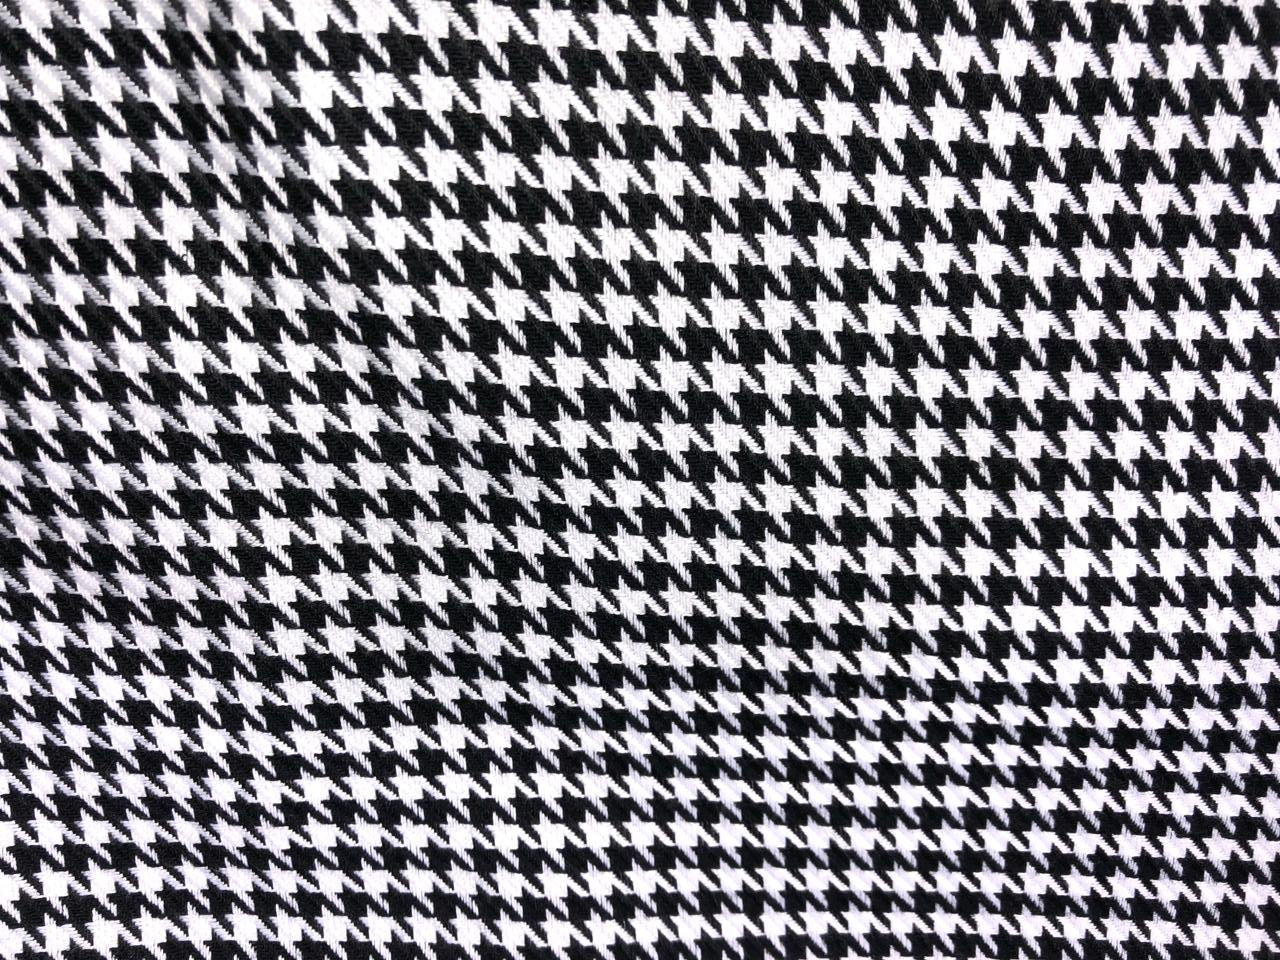 Wool and Acrylic blend fabric Houndstooth [15815]